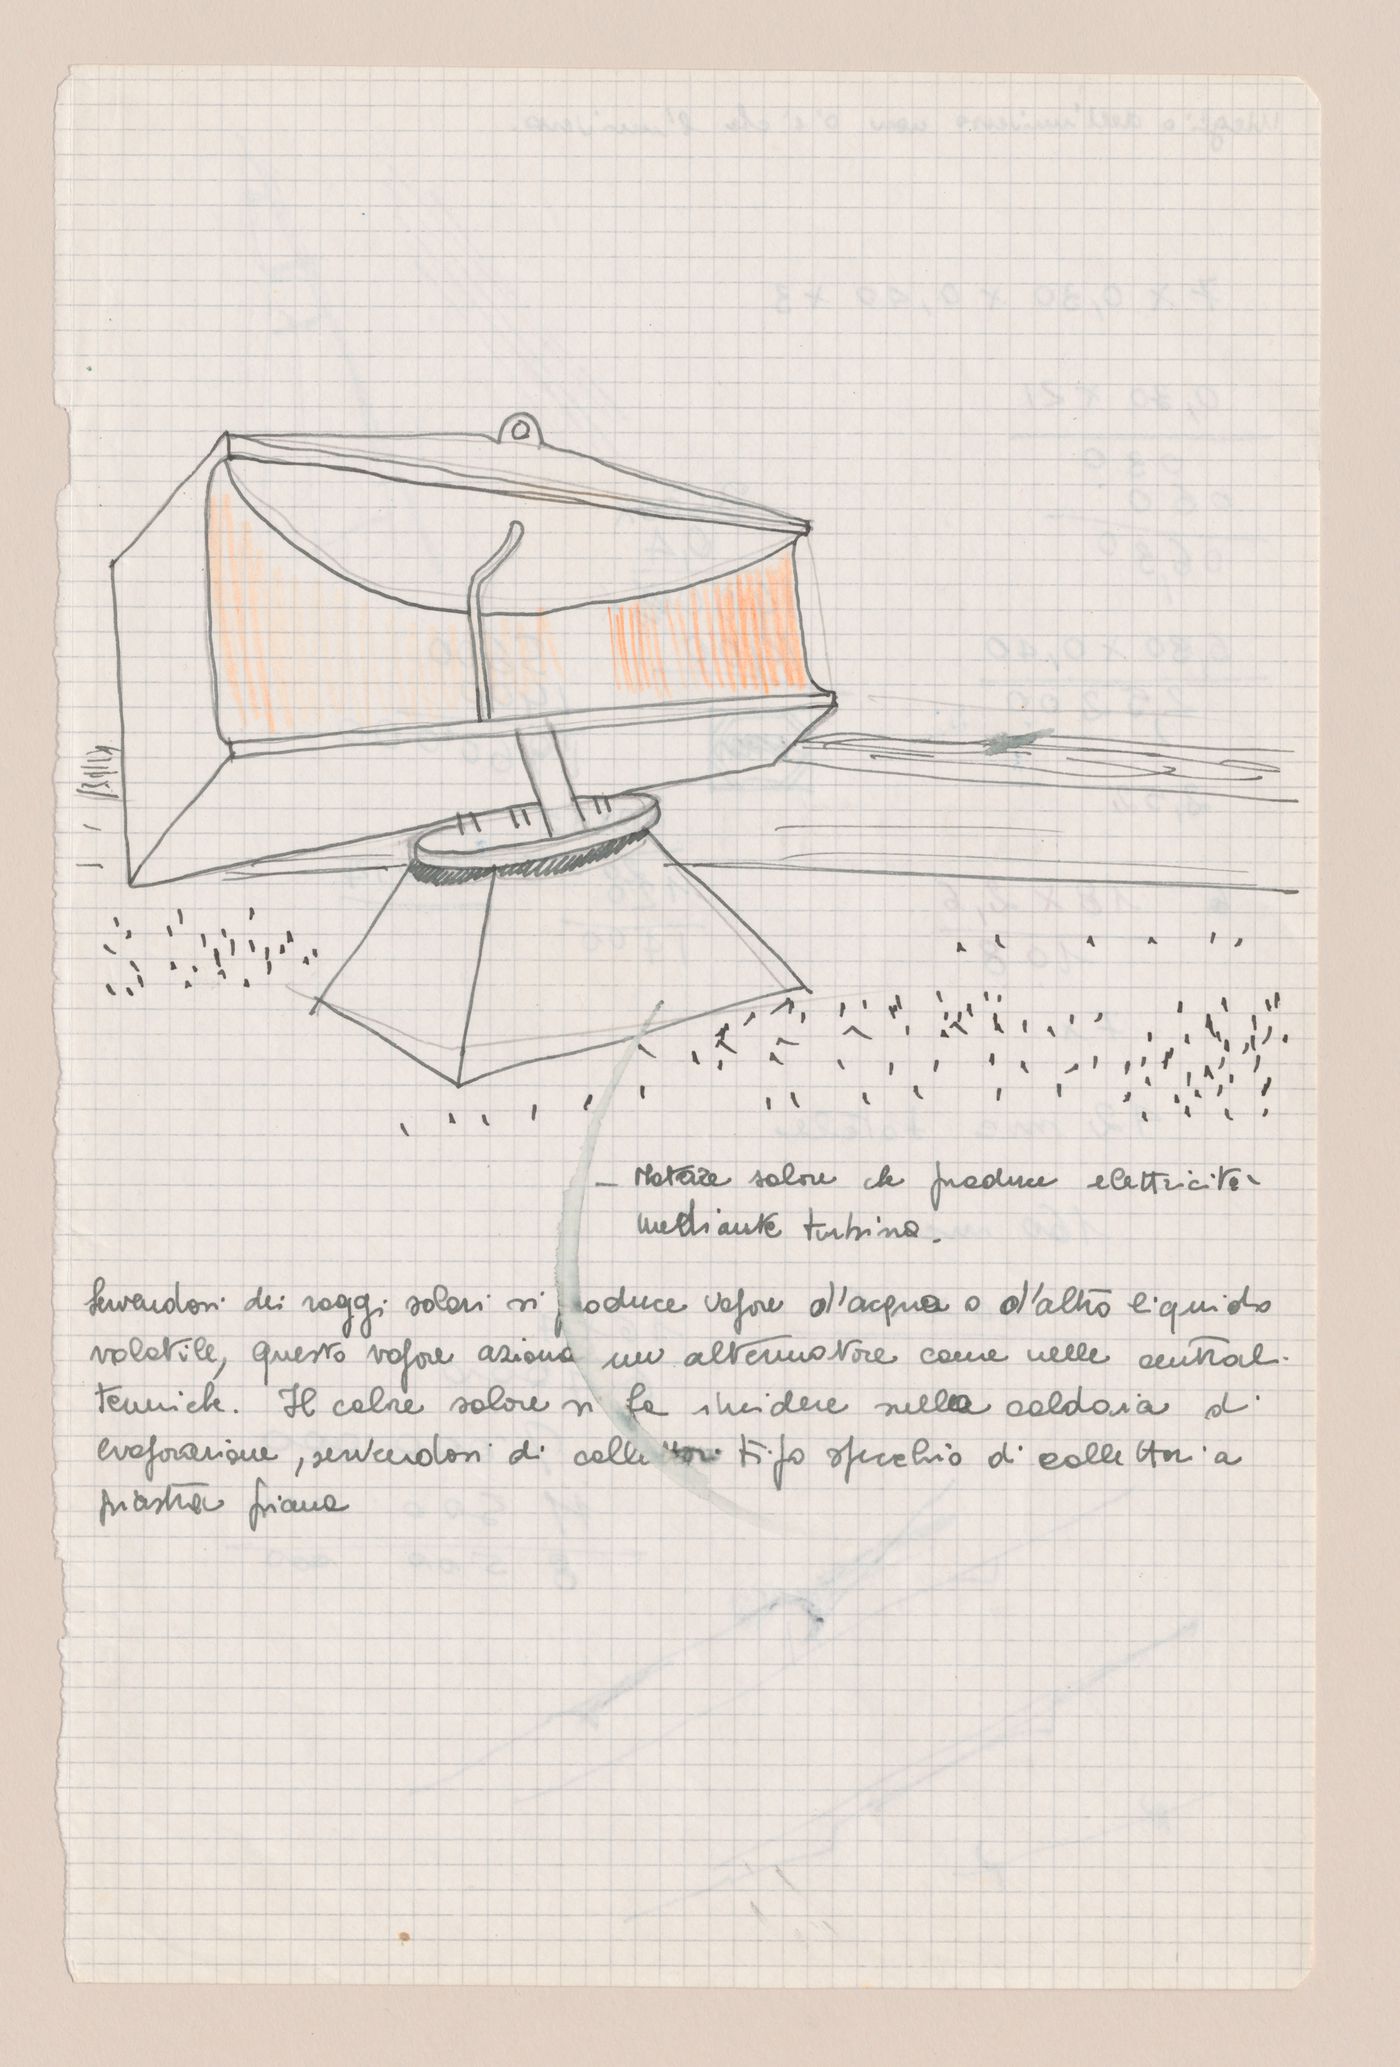 Notes and sketches for Architettura Interplanetaria [Interplanetary Architecture]